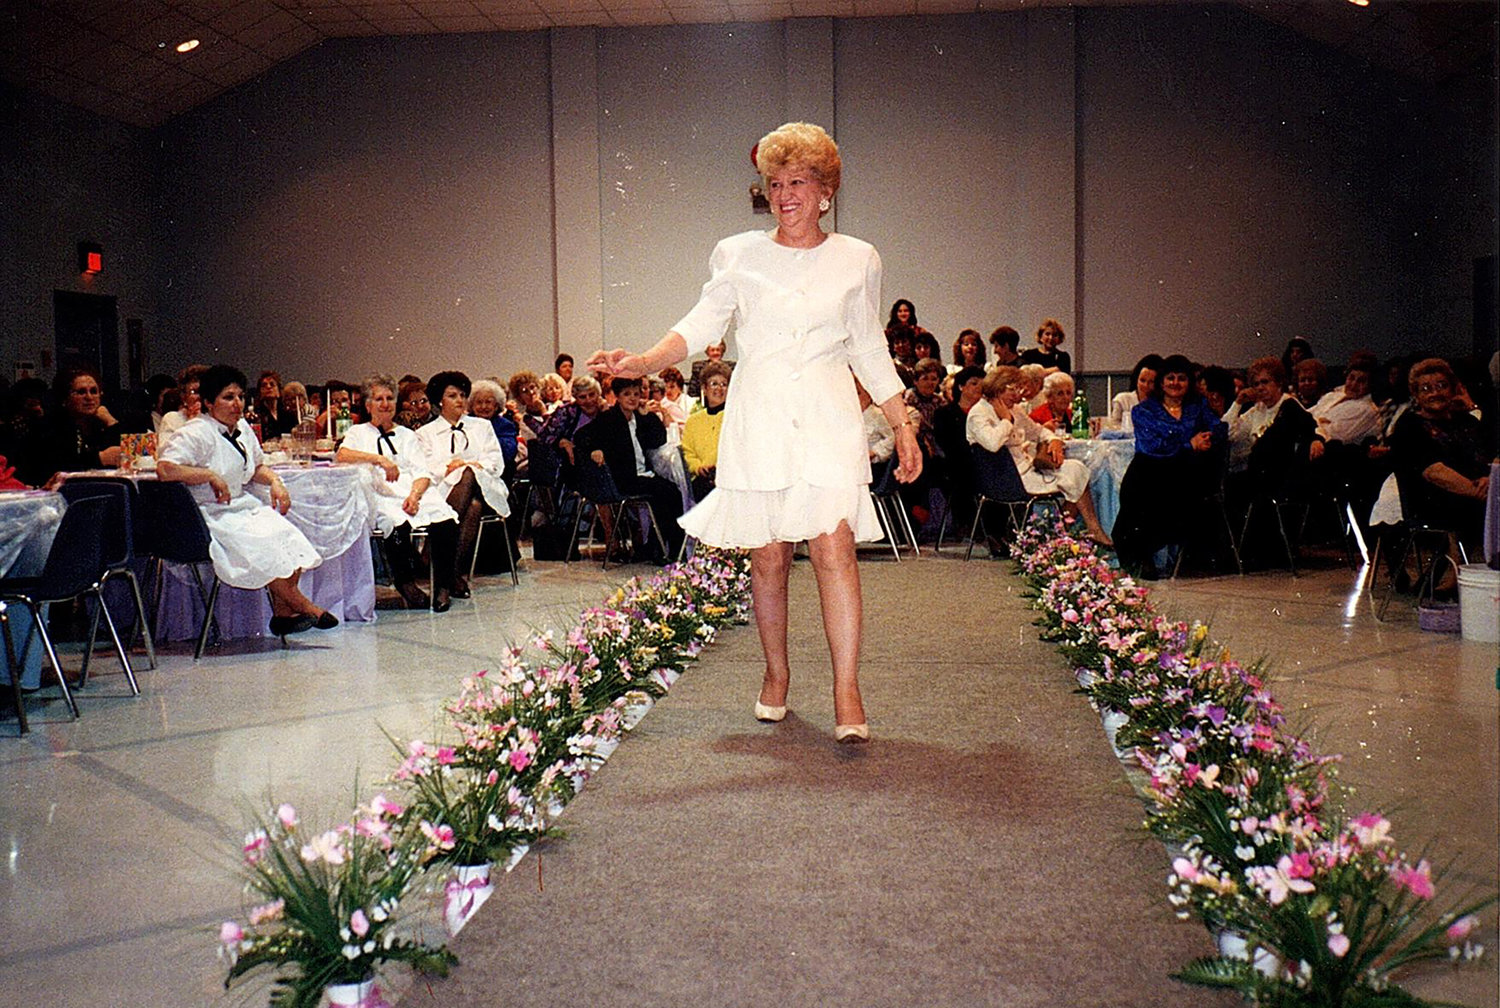 Yolanda Ruthkowski, 68, strutted down the runway for the St. Rocco’s fashion show in 1993.